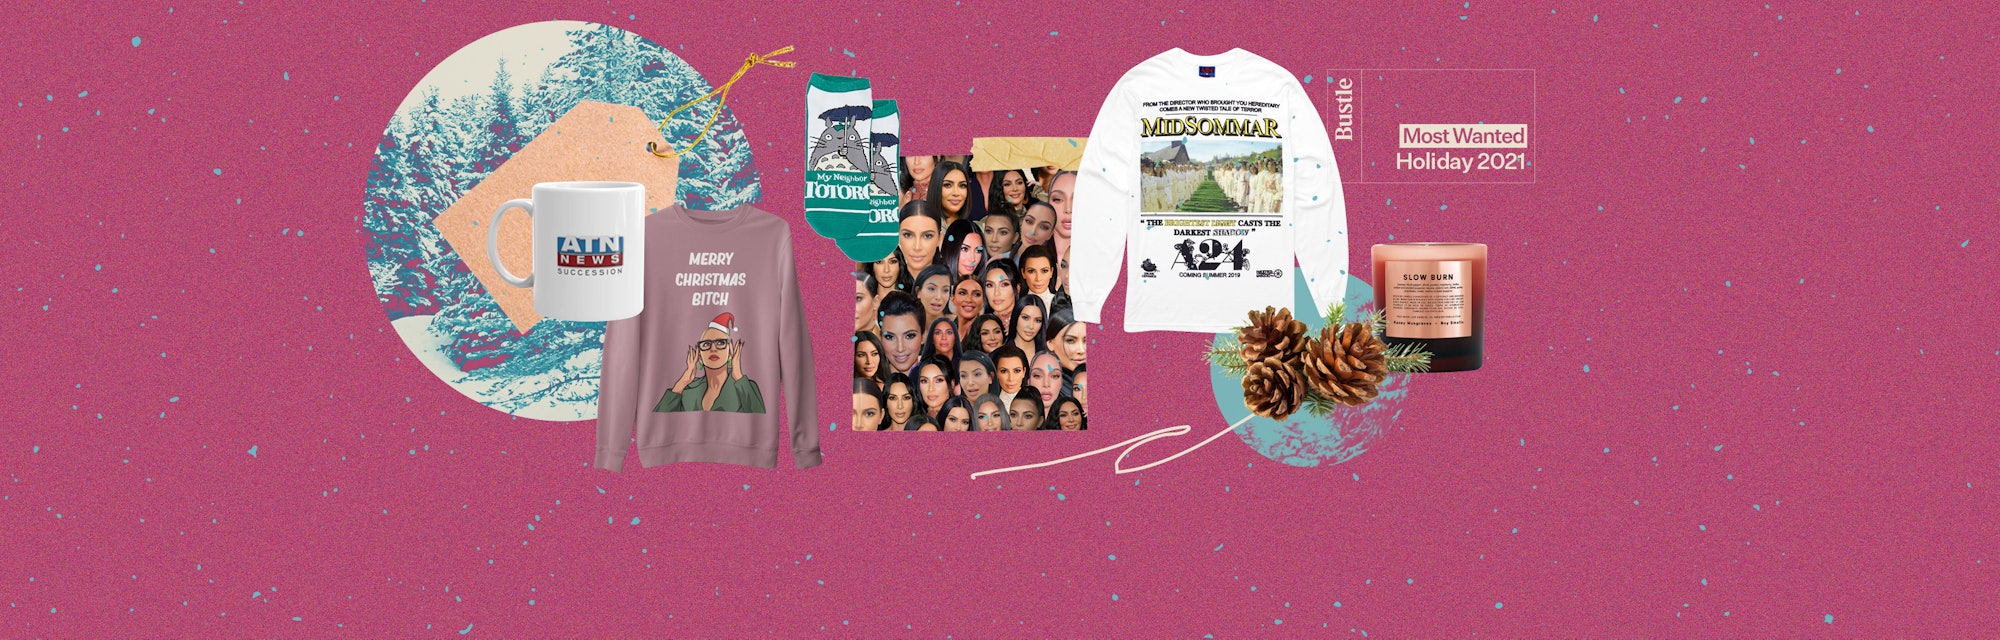 Sweatshirts, novelty mugs, and more ideas for pop culture-themed gifts.